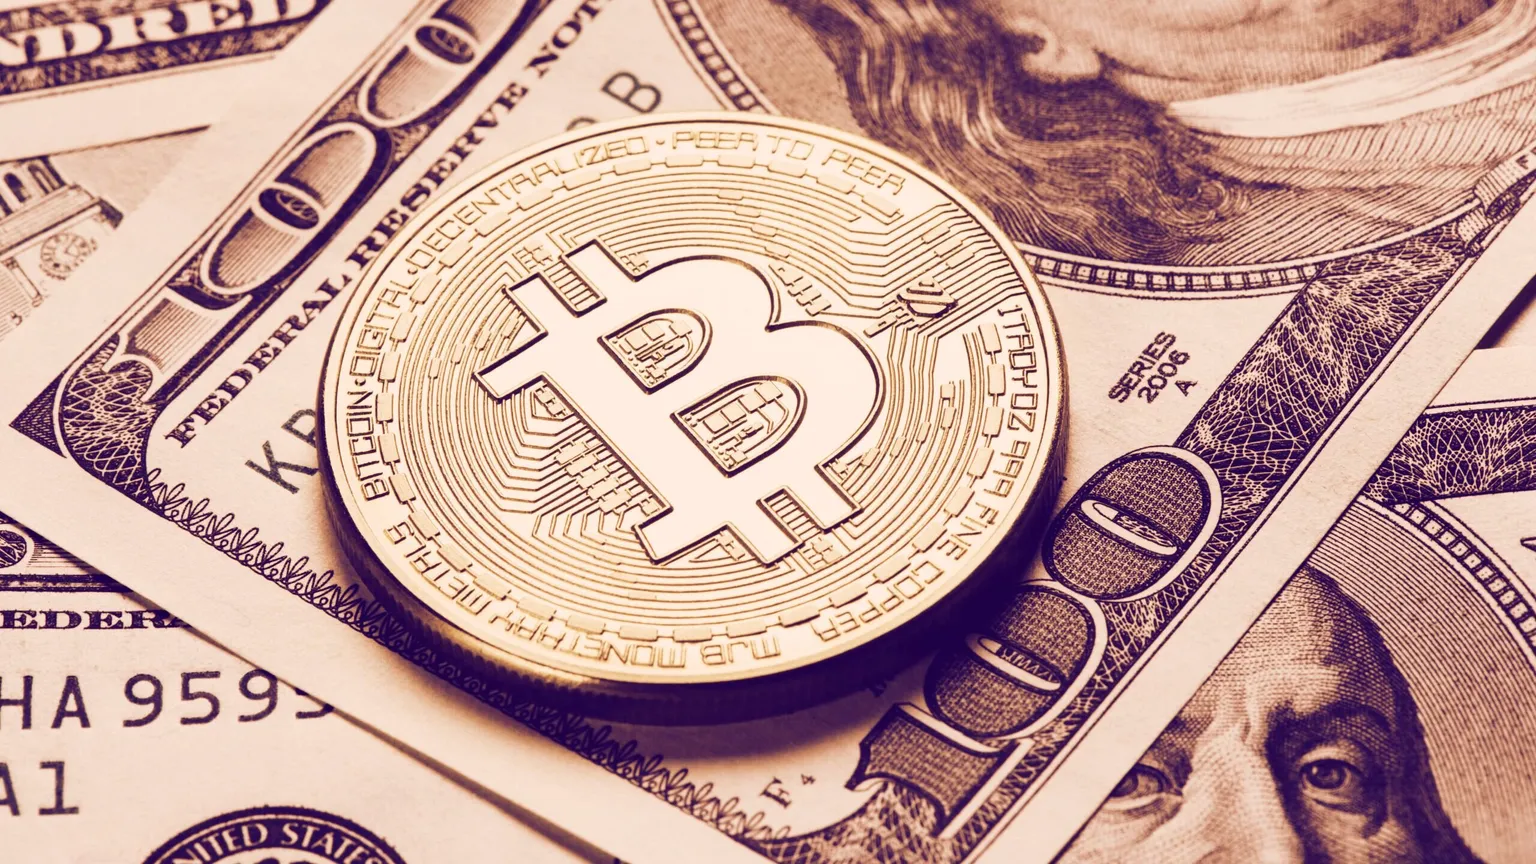 A Bitcoin resting on top of some dollars: Shutterstock